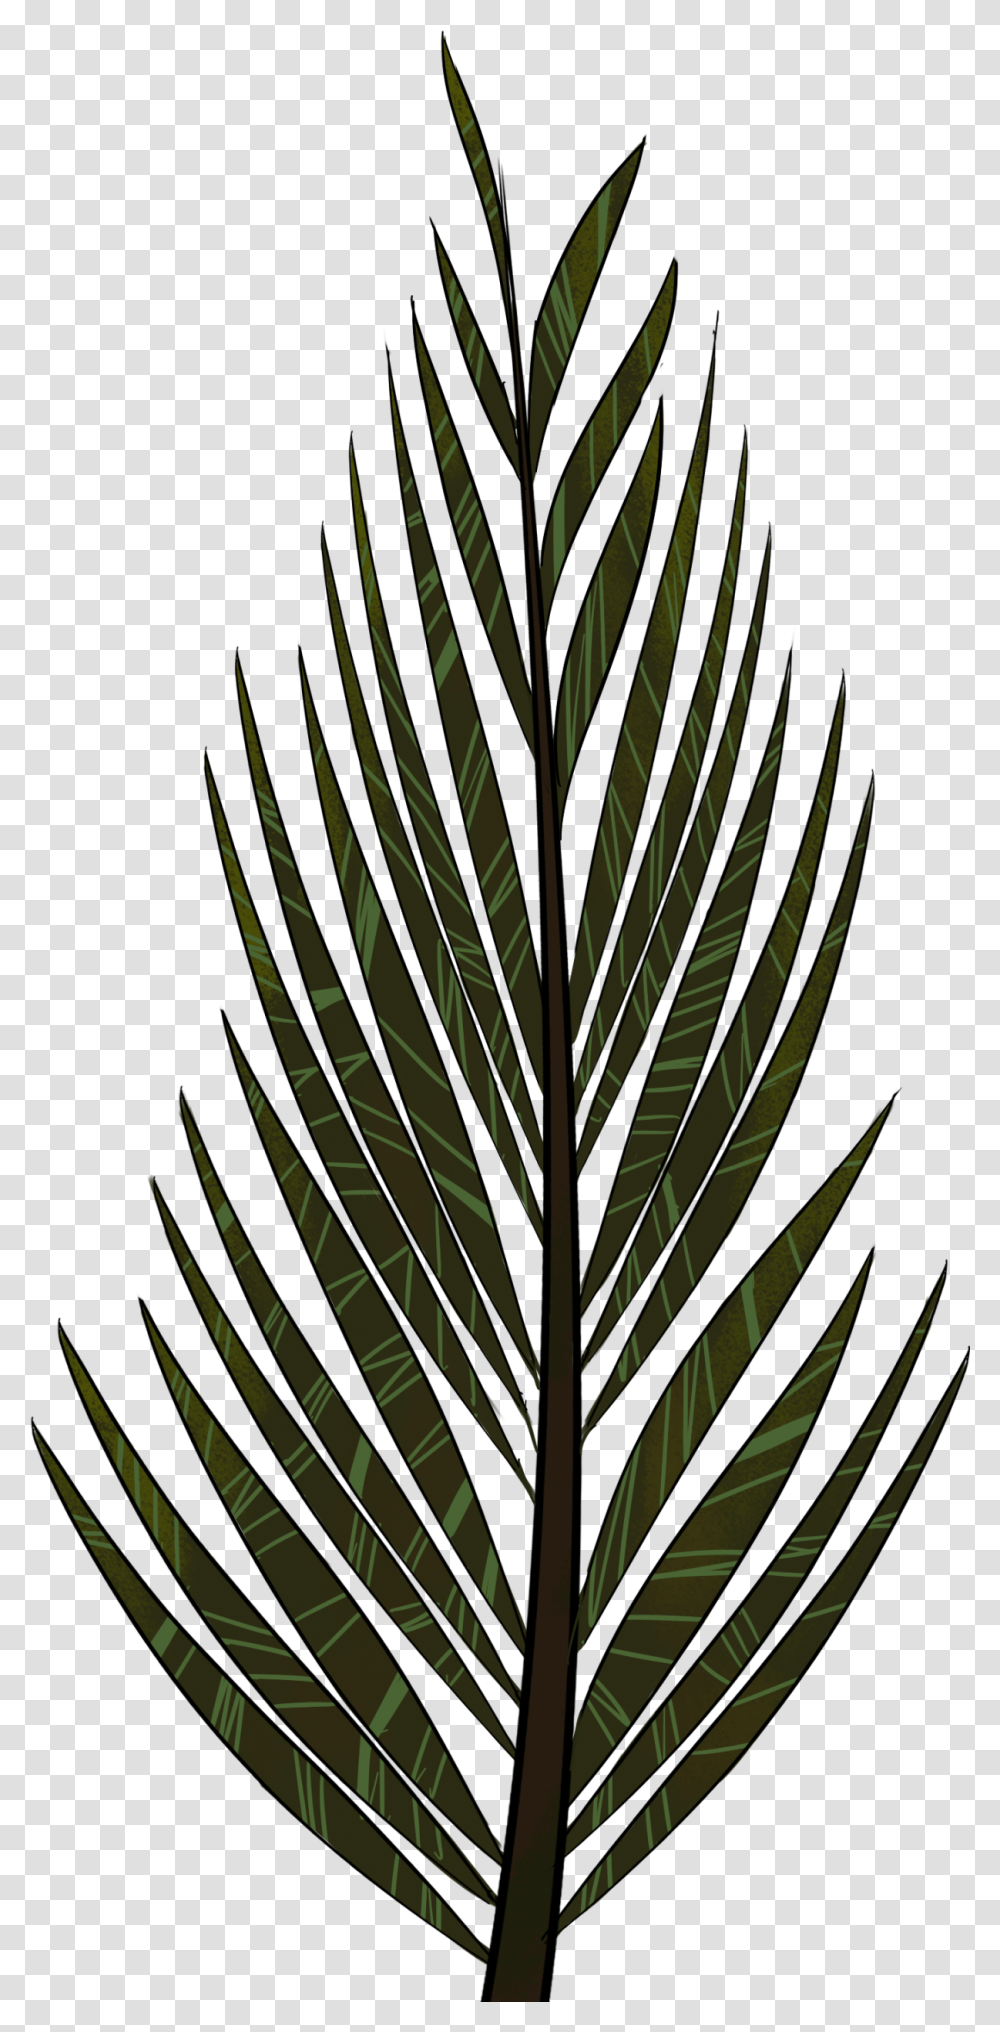 Thumb Image Pine Tree Leaves Drawing, Pineapple, Fruit, Plant, Food Transparent Png